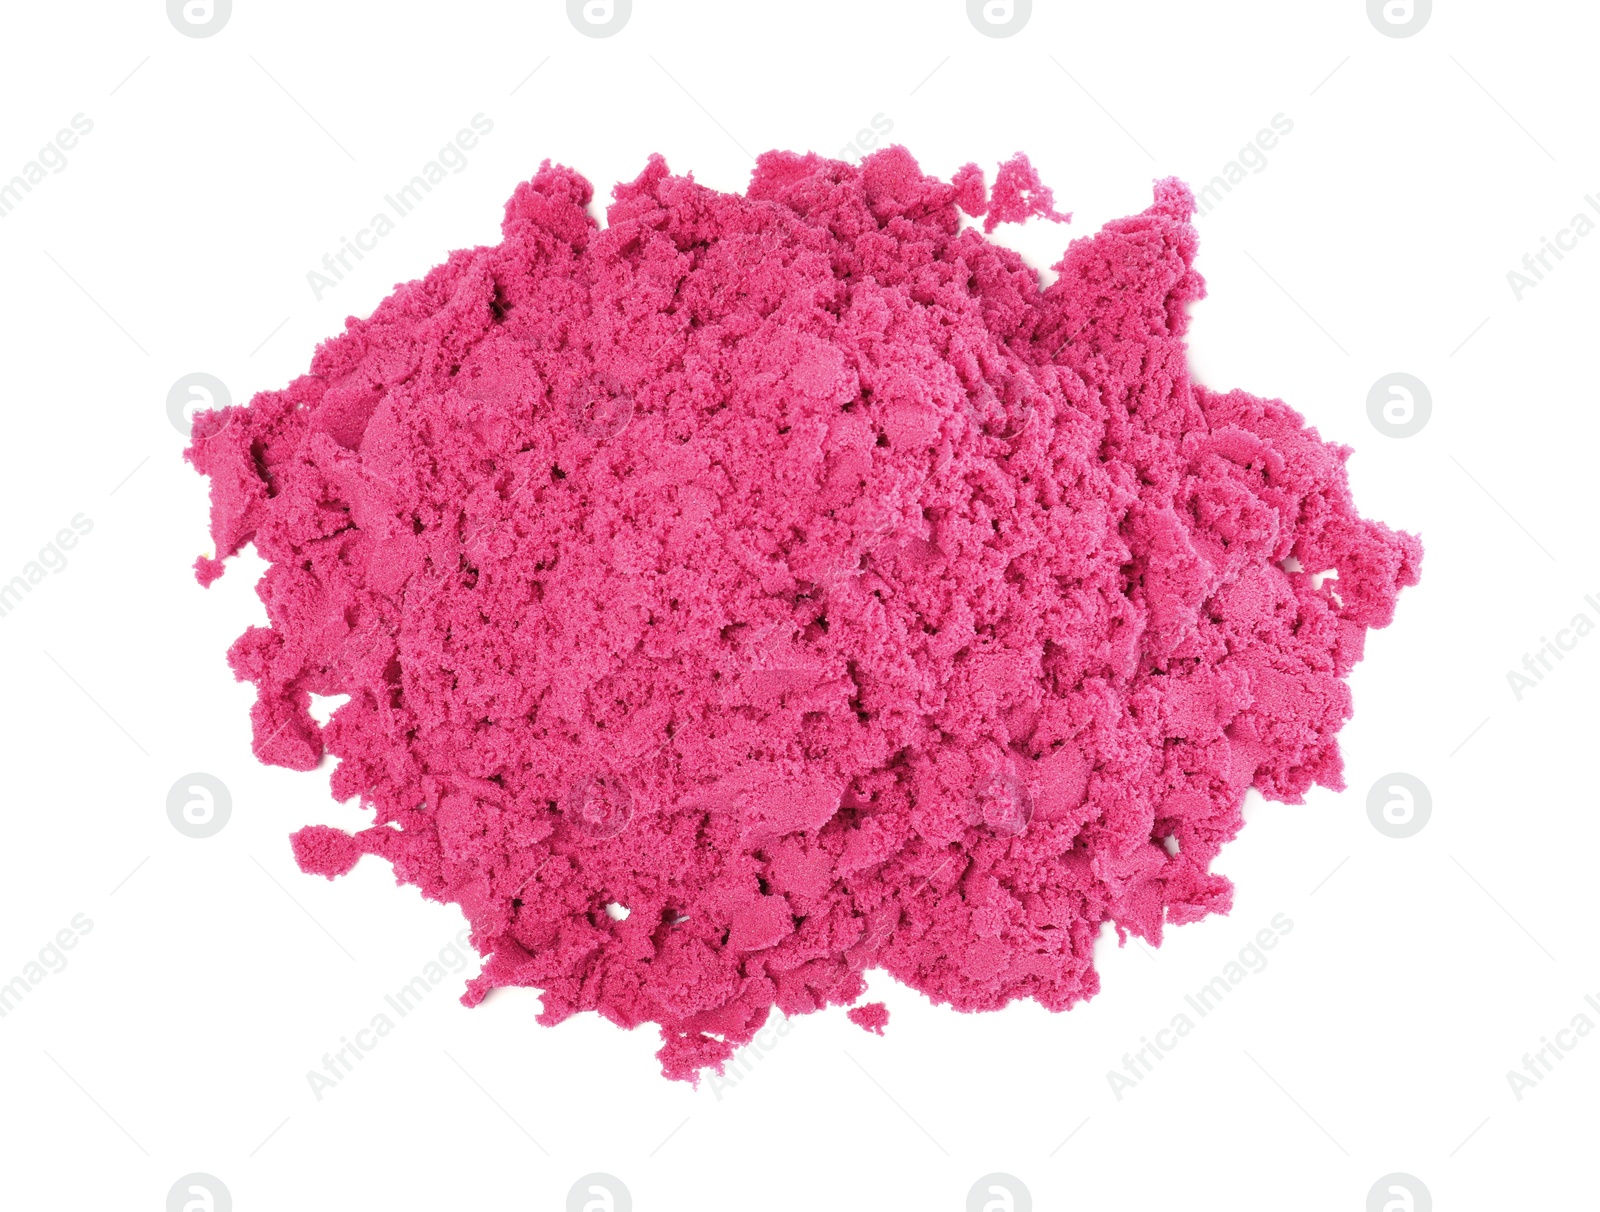 Photo of Pile of pink kinetic sand on white background, top view